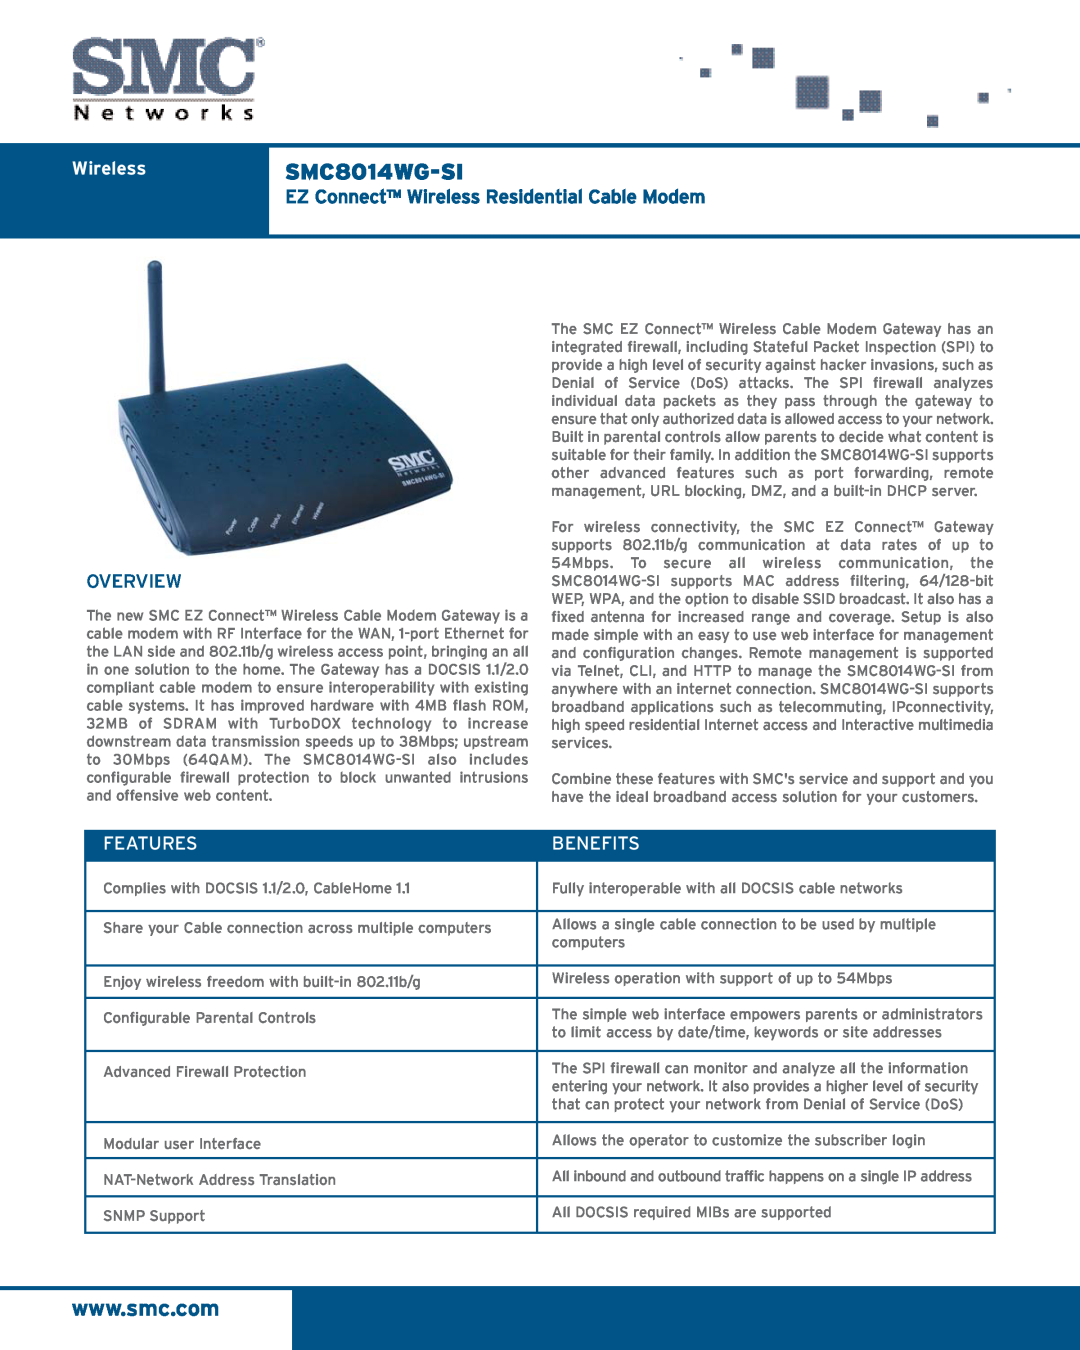 SMC Networks manual WirelessSMC8014WG-SI, EZ Connect Wireless Residential Cable Modem, Overview, Features, Benefits 